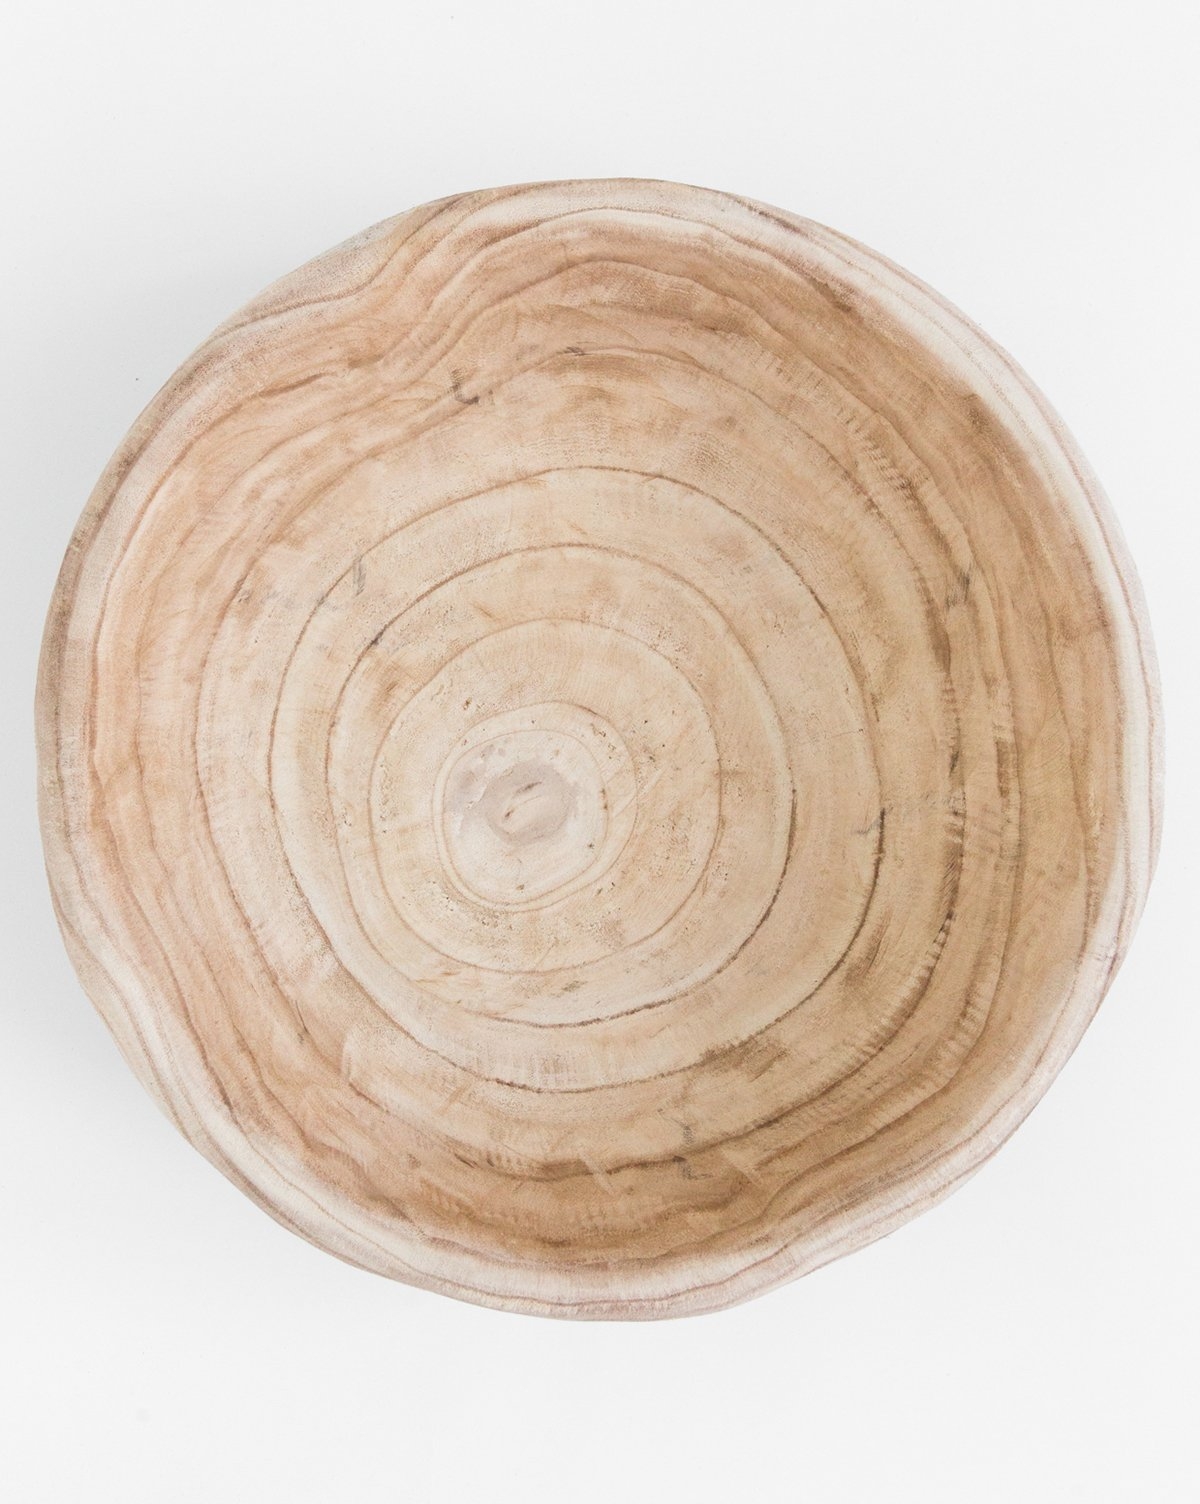 SIMPLY SMOOTH WOODEN BOWL - Image 2